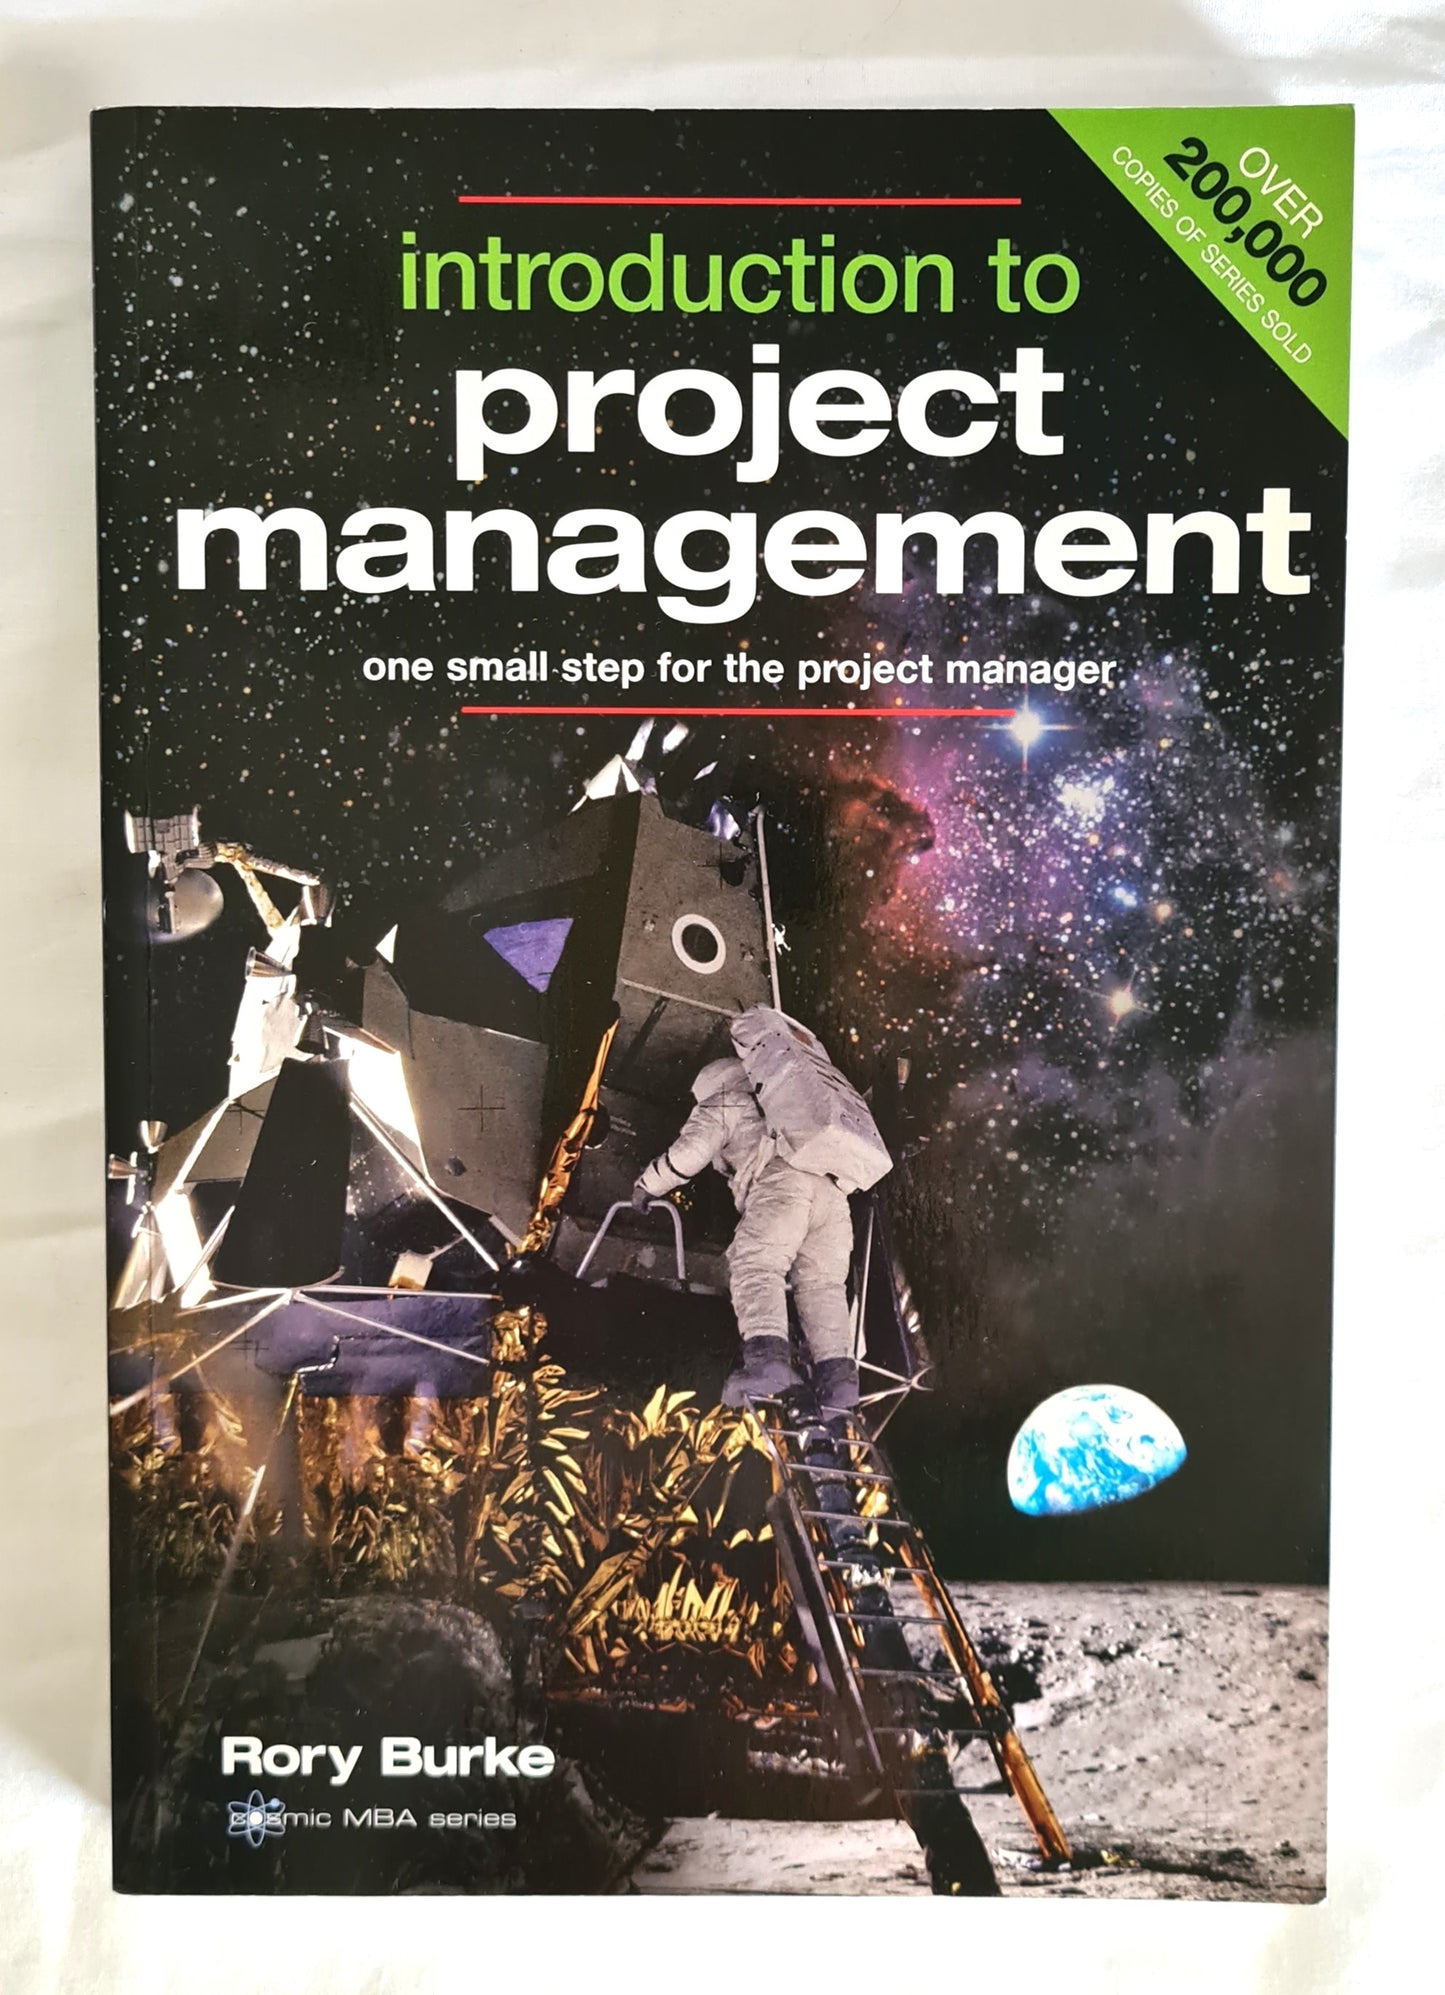 Introduction to Project Management  One small step for the project manager  by Rory Burke